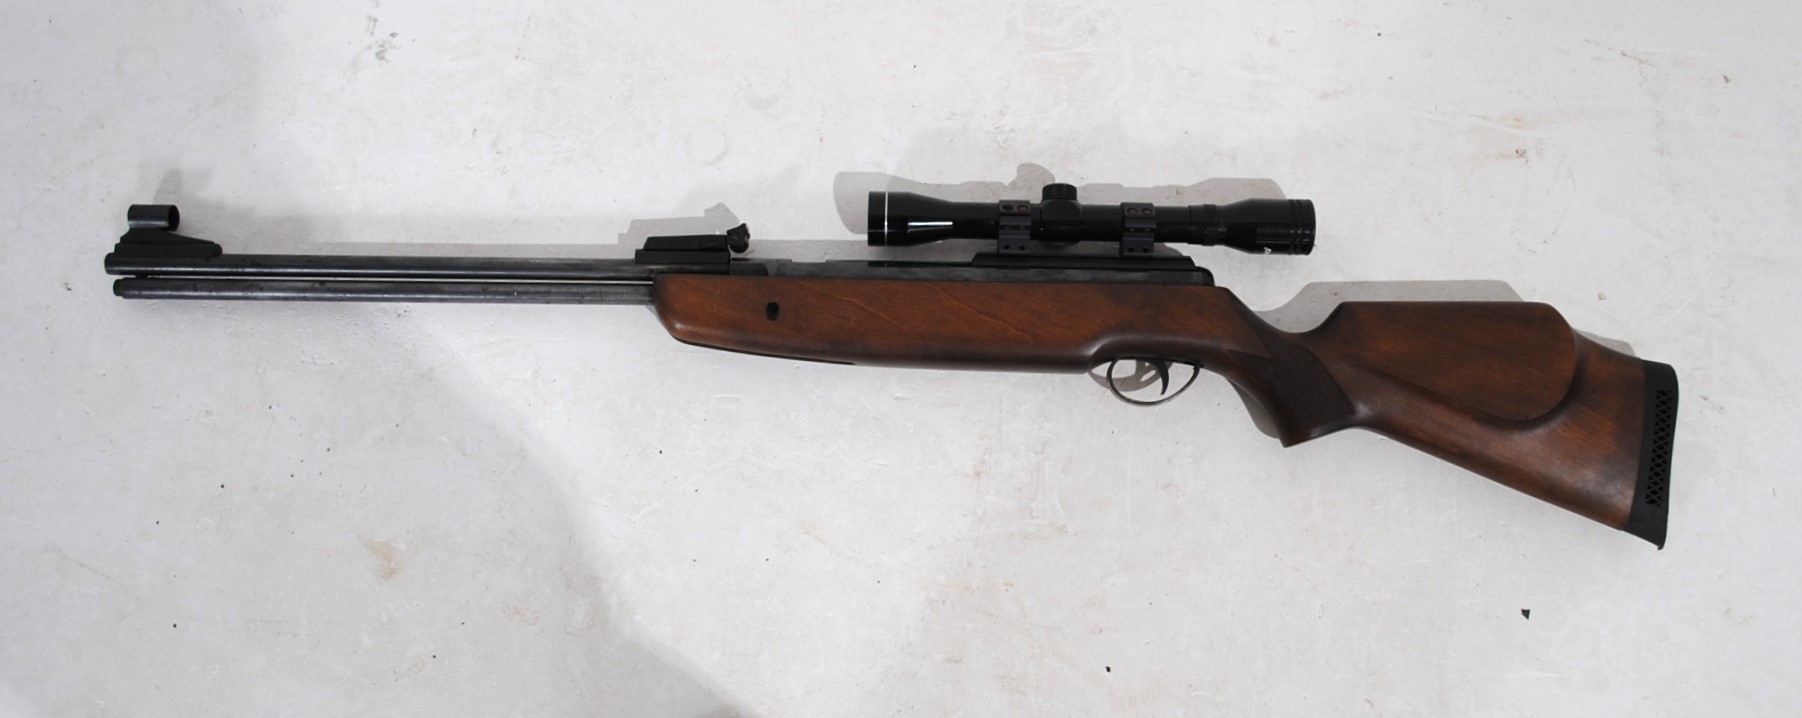 A BSA .177 underlever air rifle, with Tasco 4x32 scope, cleaning kit and case - Image 3 of 10